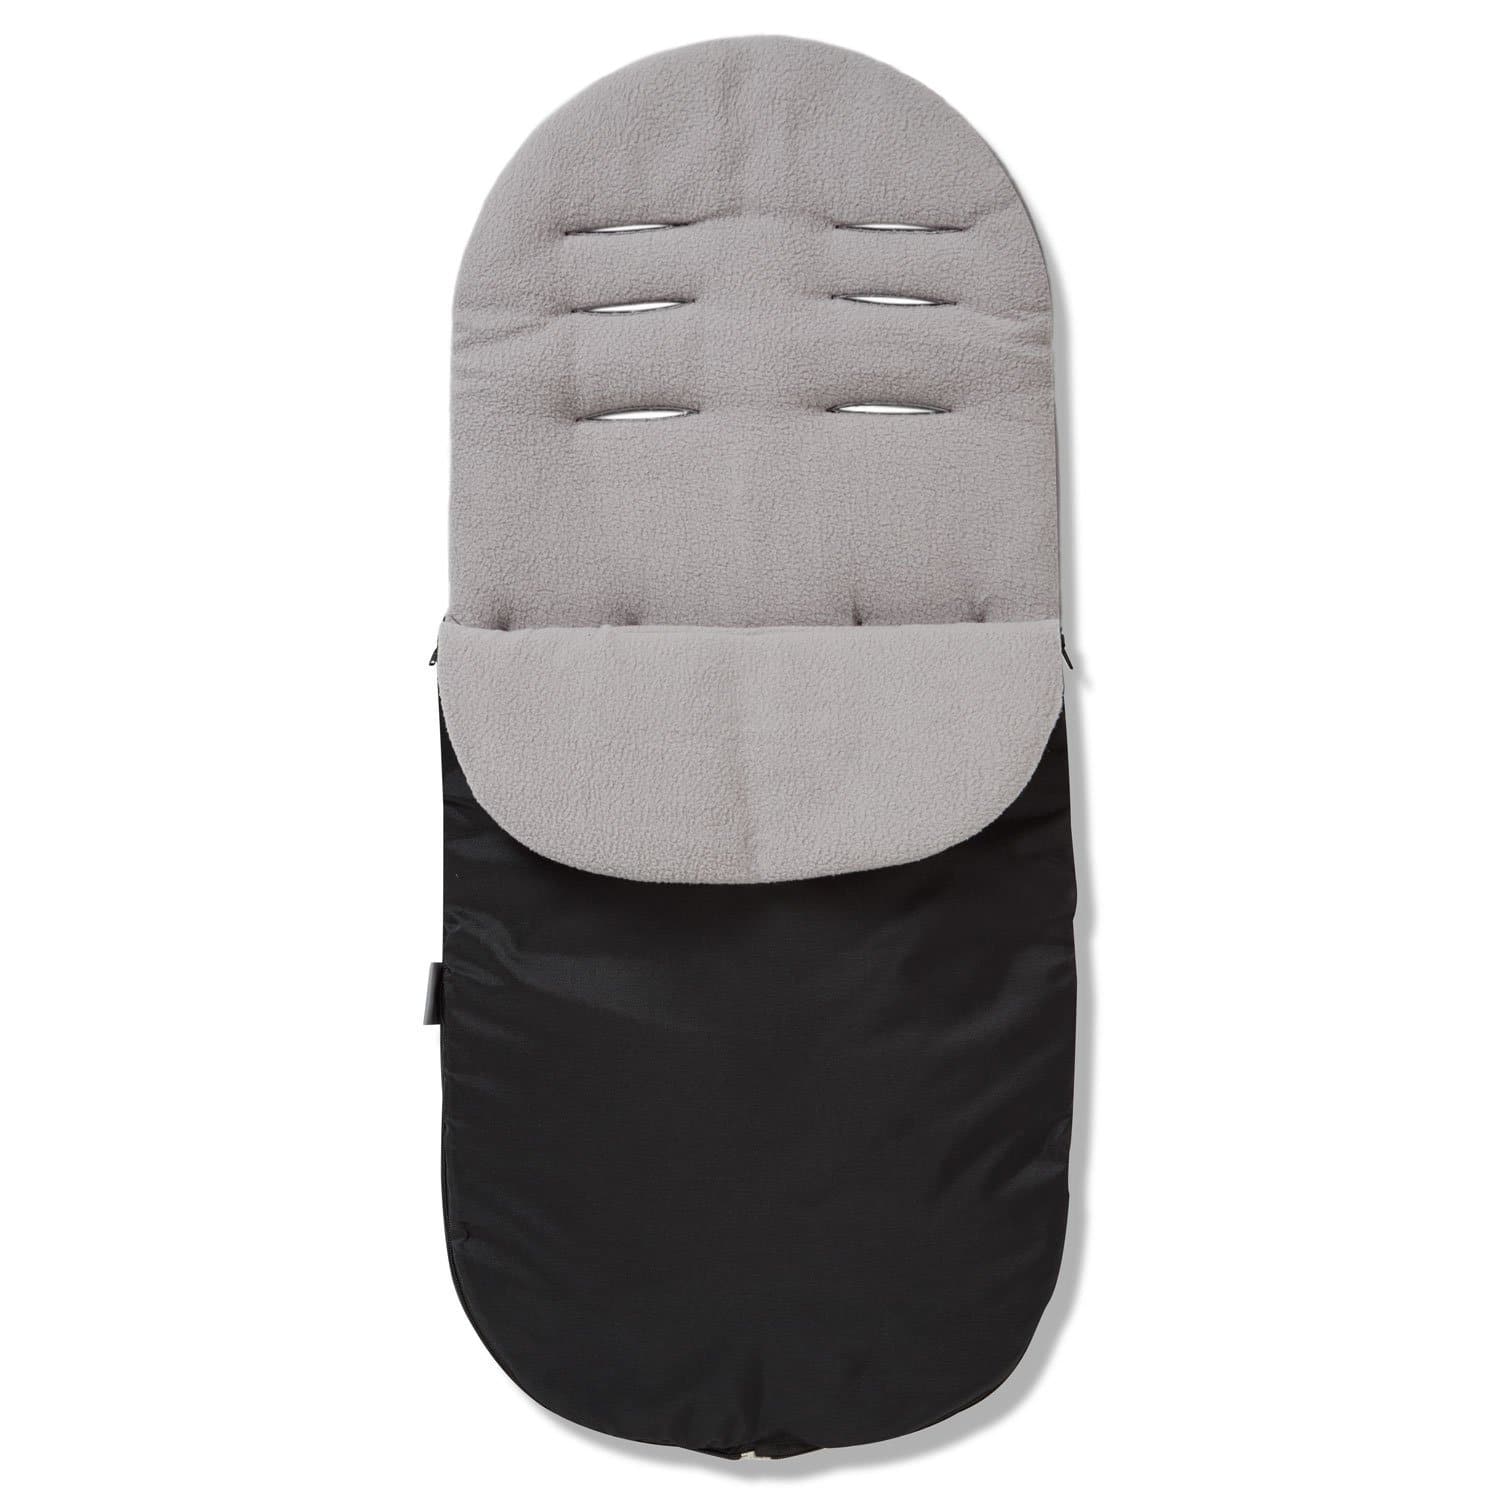 Footmuff / Cosy Toes Compatible with Orbit - Grey / Fits All Models | For Your Little One